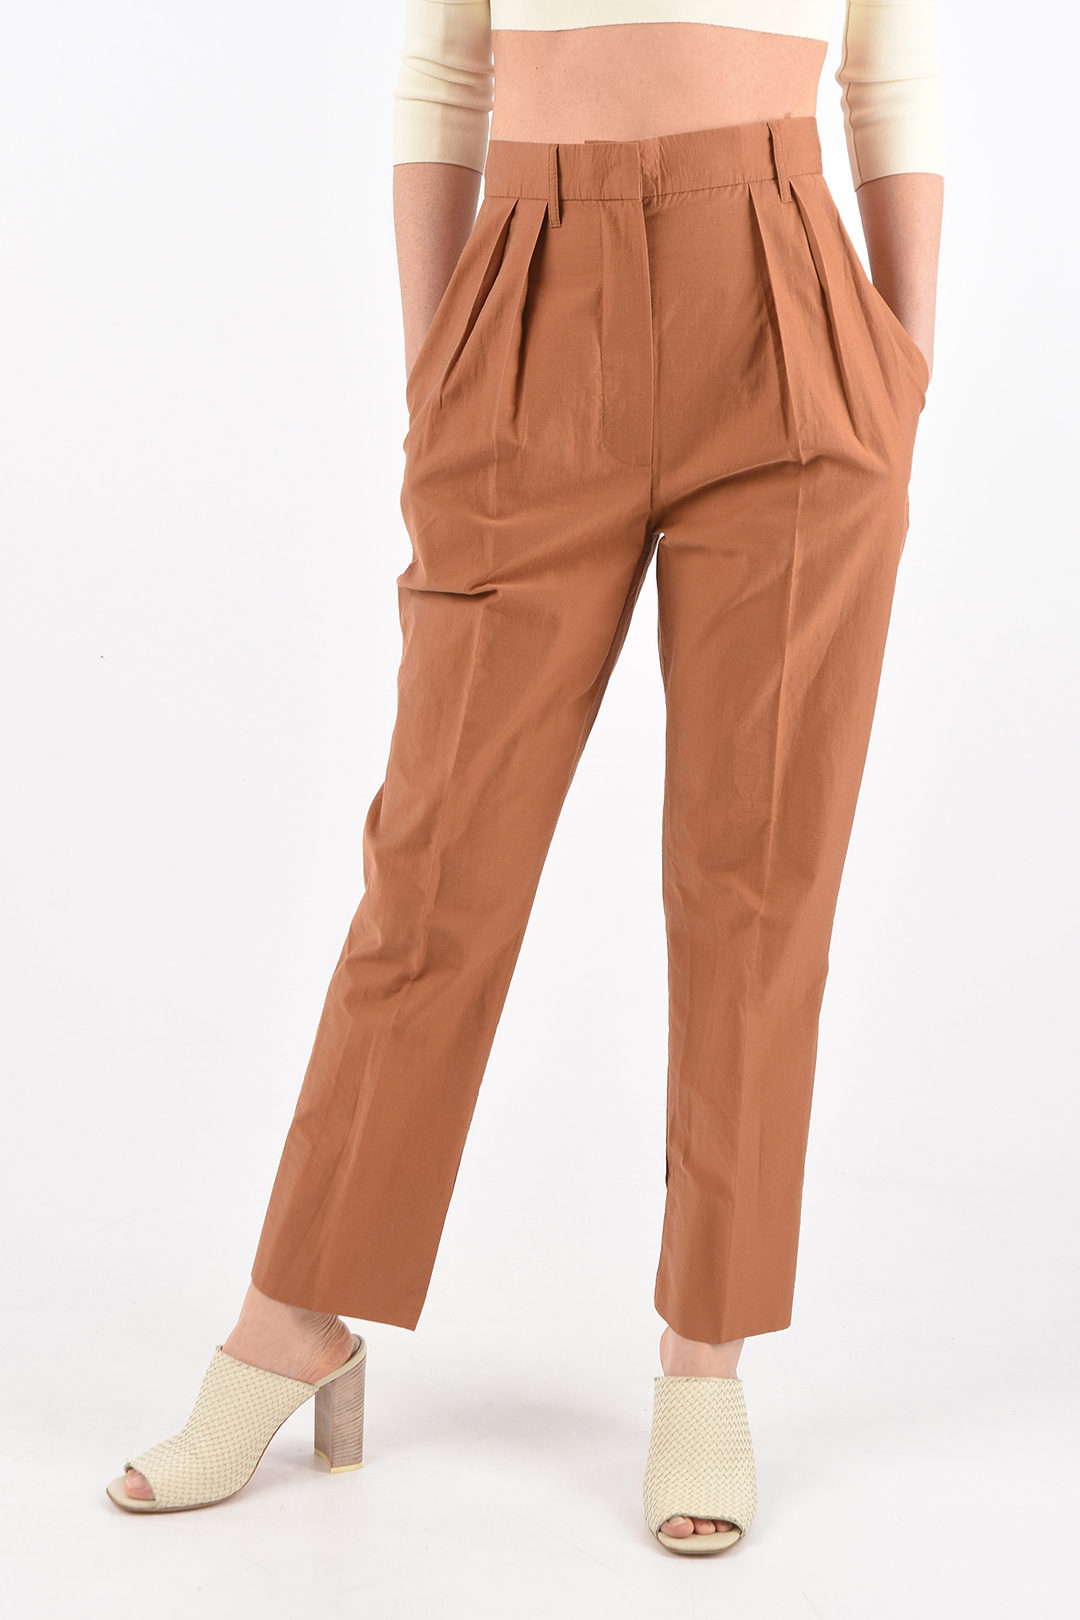 Buy River Island Pleated Trousers from the Next UK online shop